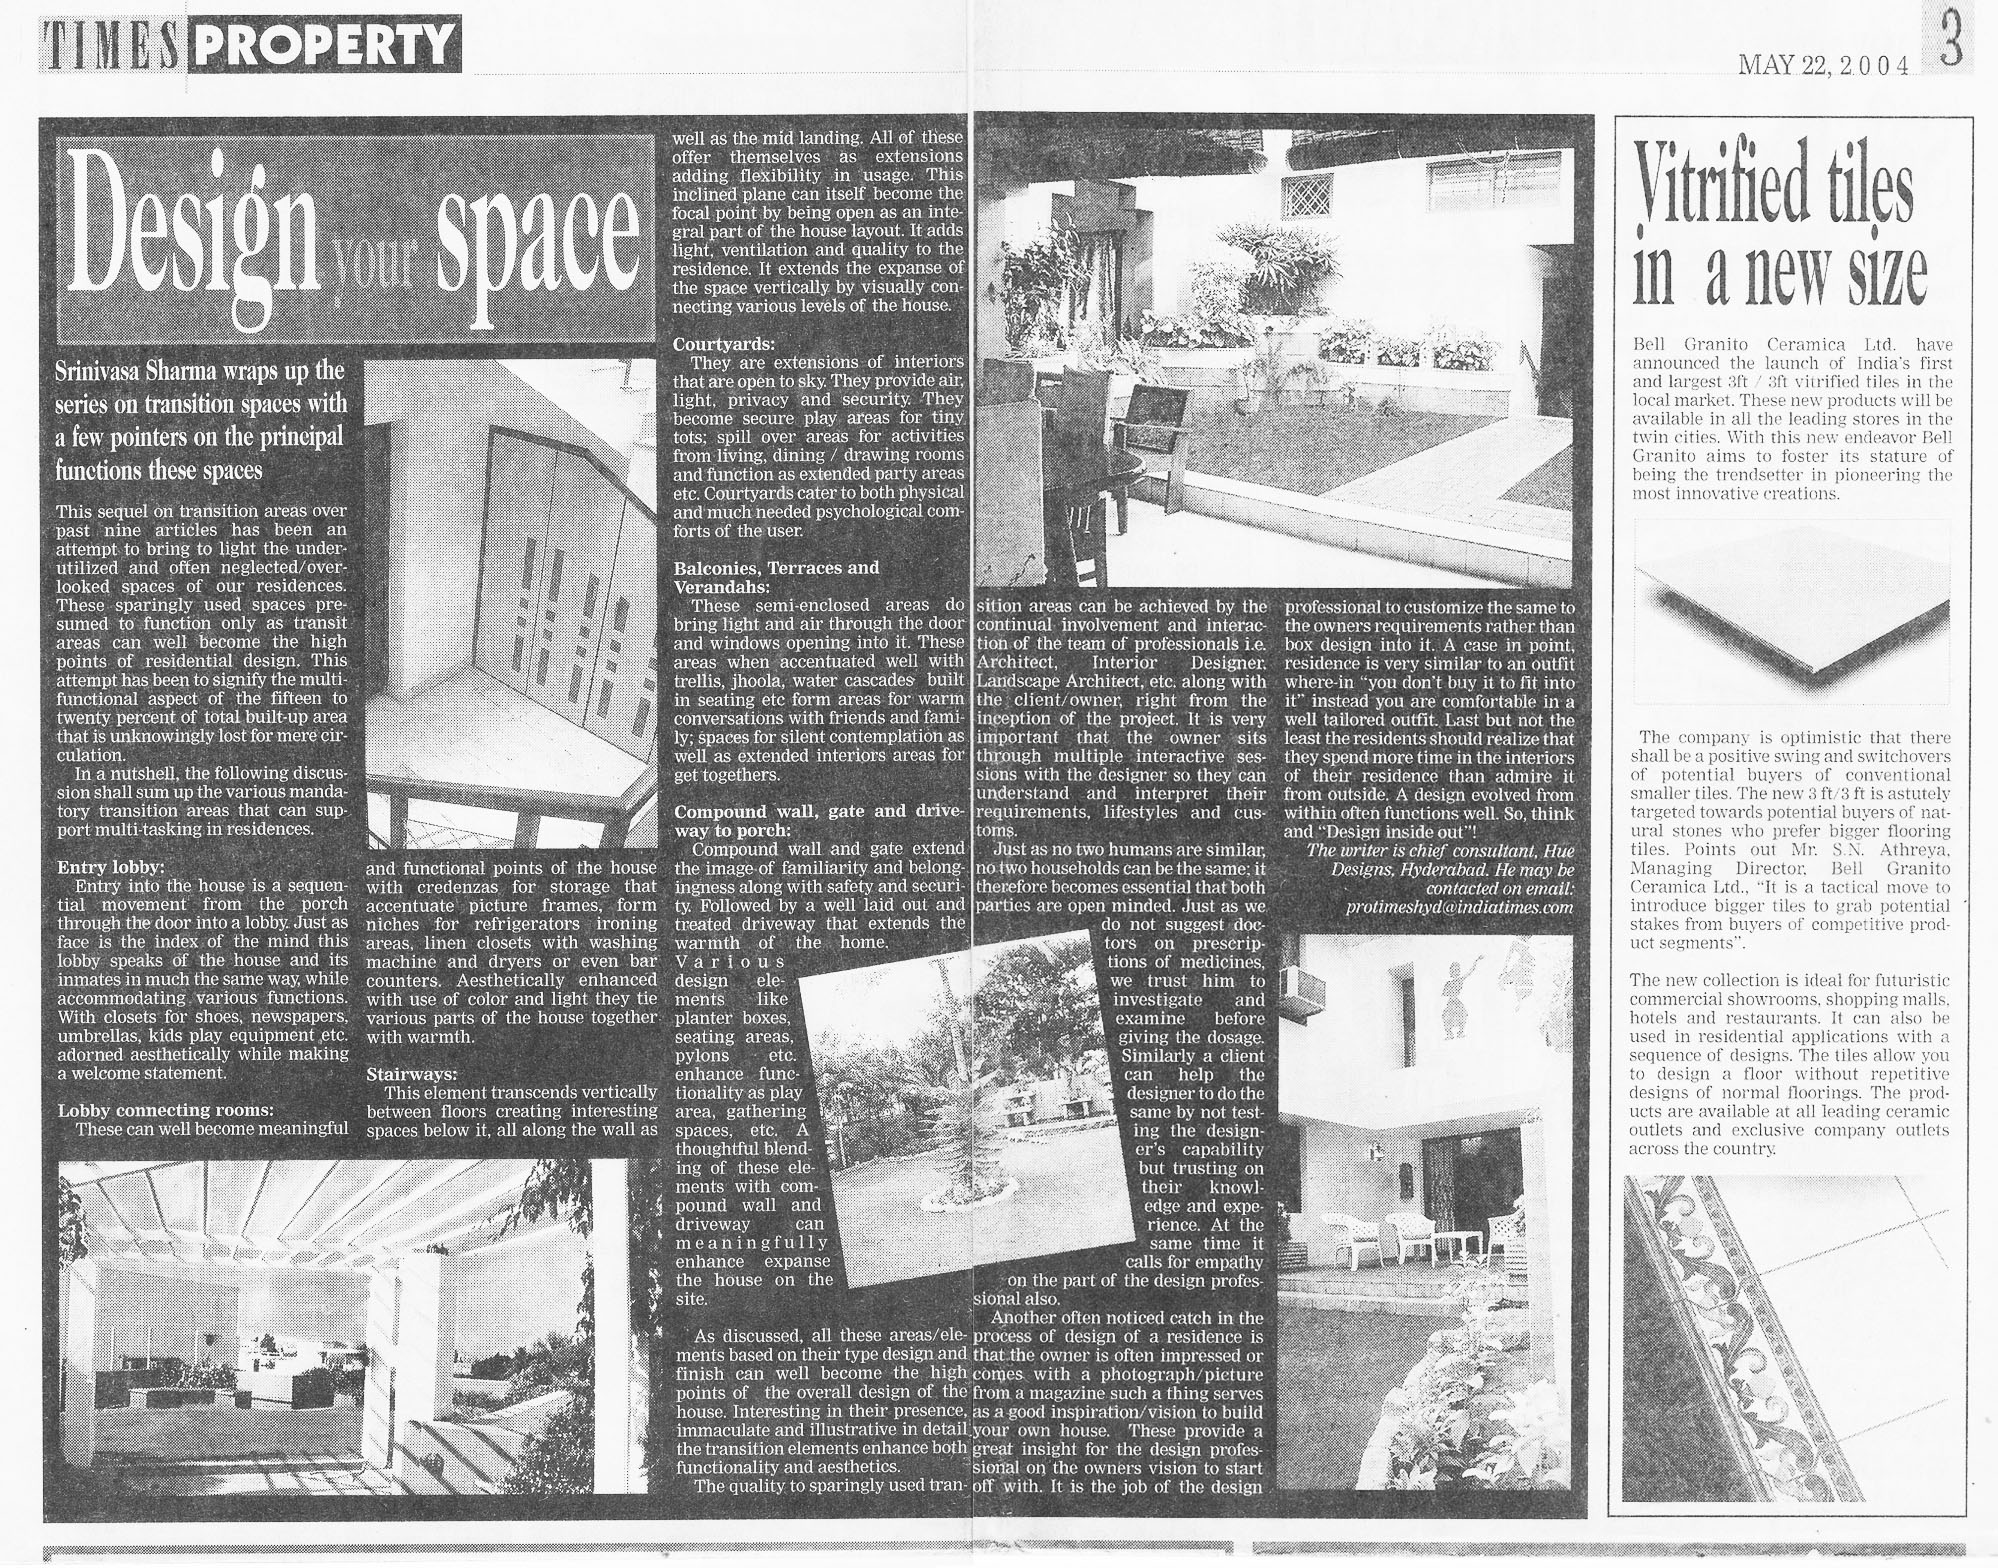 Times property article- Transition spaces 